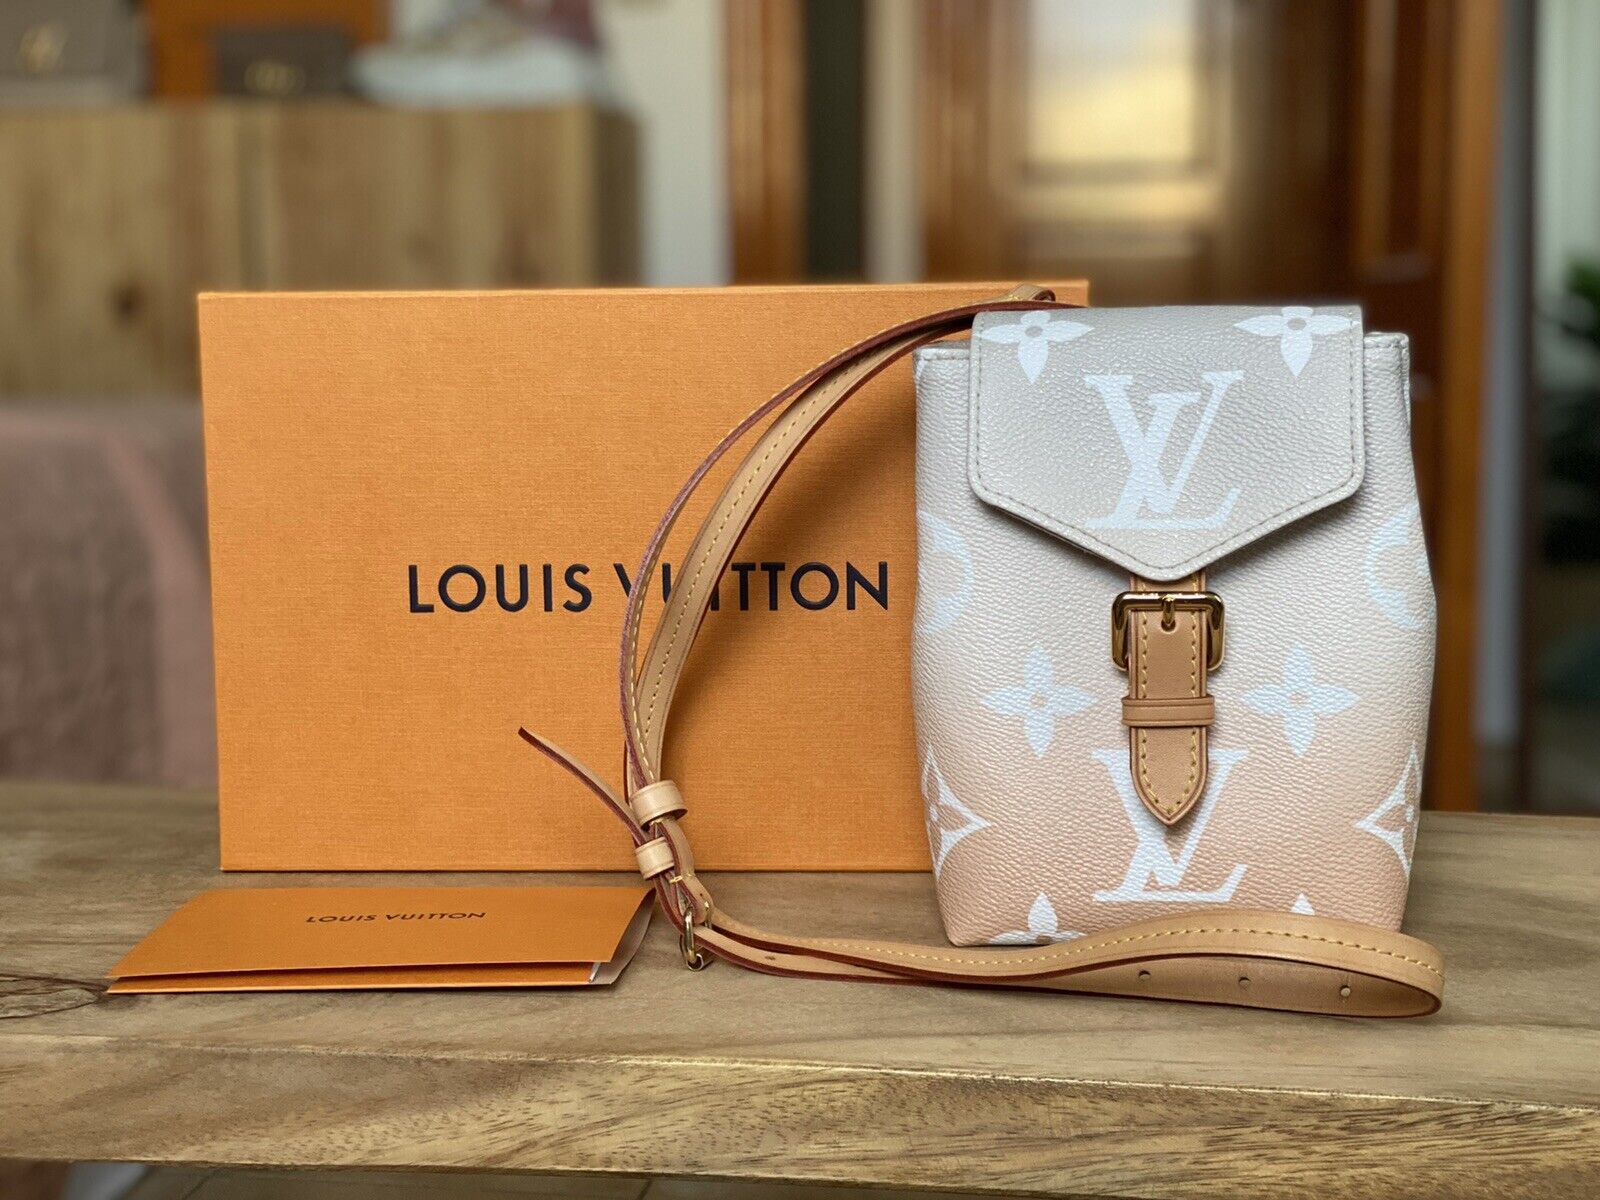 Tiny Backpack By the Pool Louis Vuitton